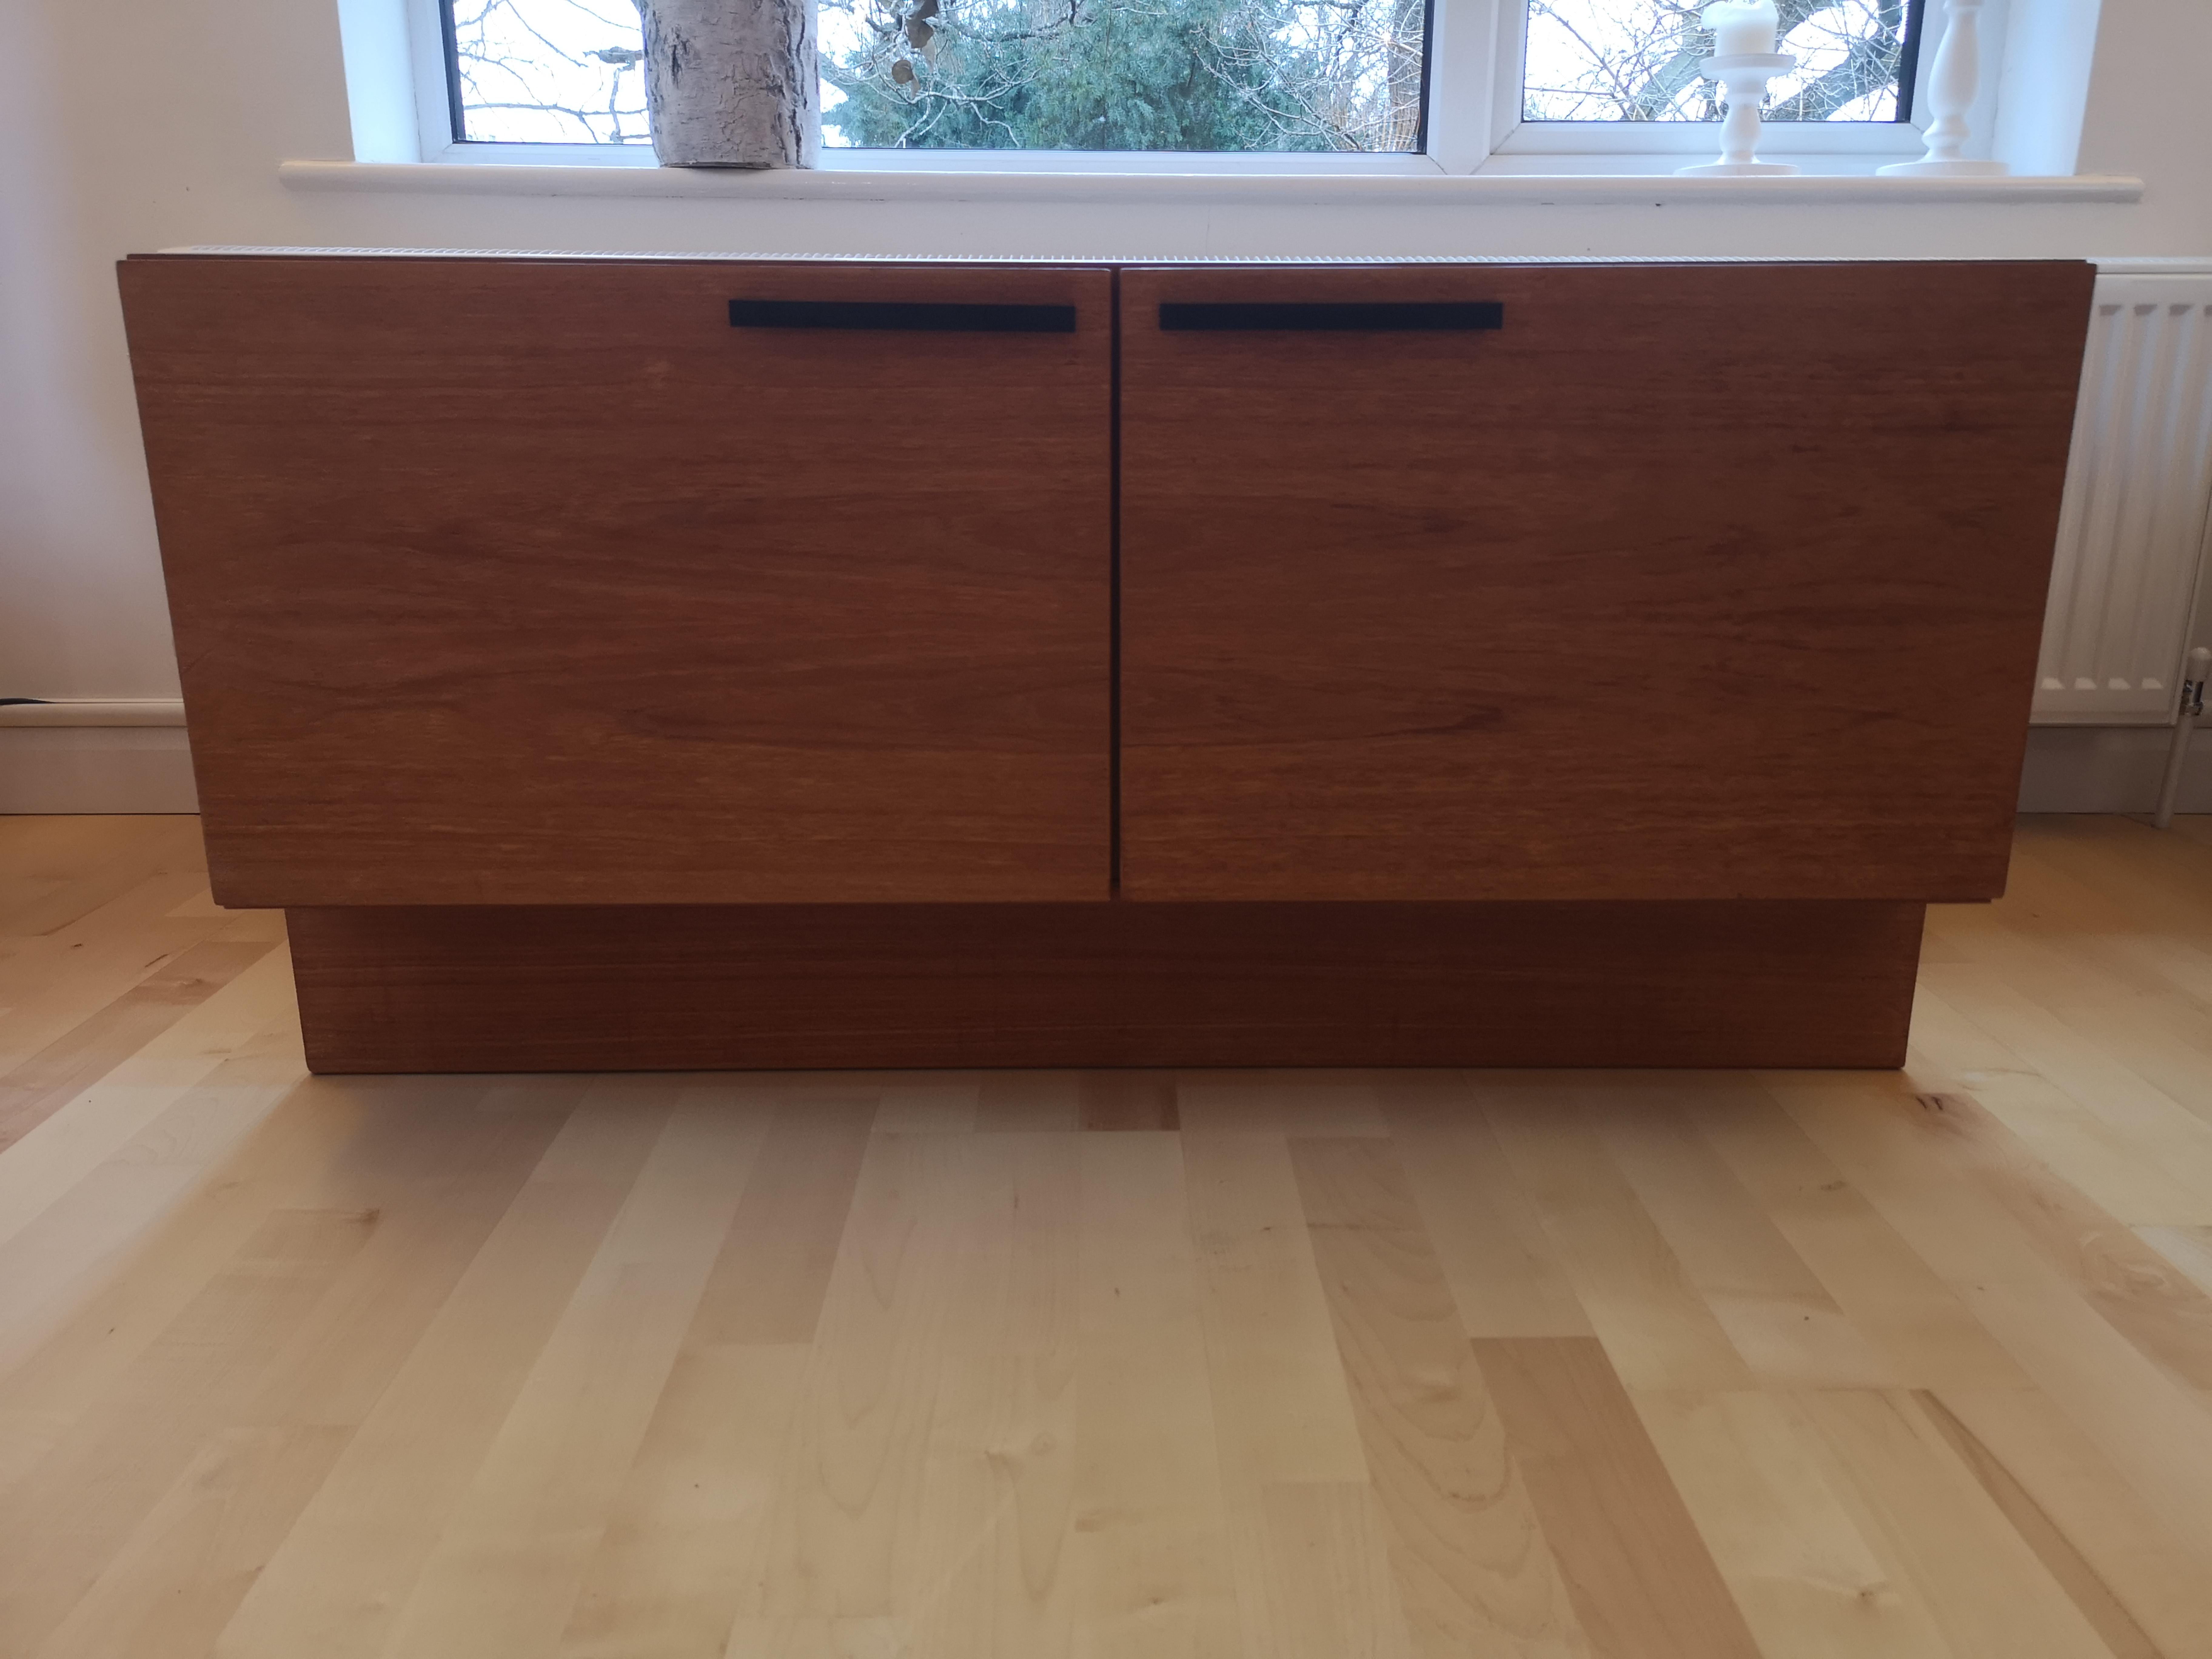 A gorgeus Danish midcentury low teak sideboard by Ib Kofod Larsen for Faarup Möbelfabrik. Timeless crisp design from 1960s. Would make a great TV stand in a modern home.